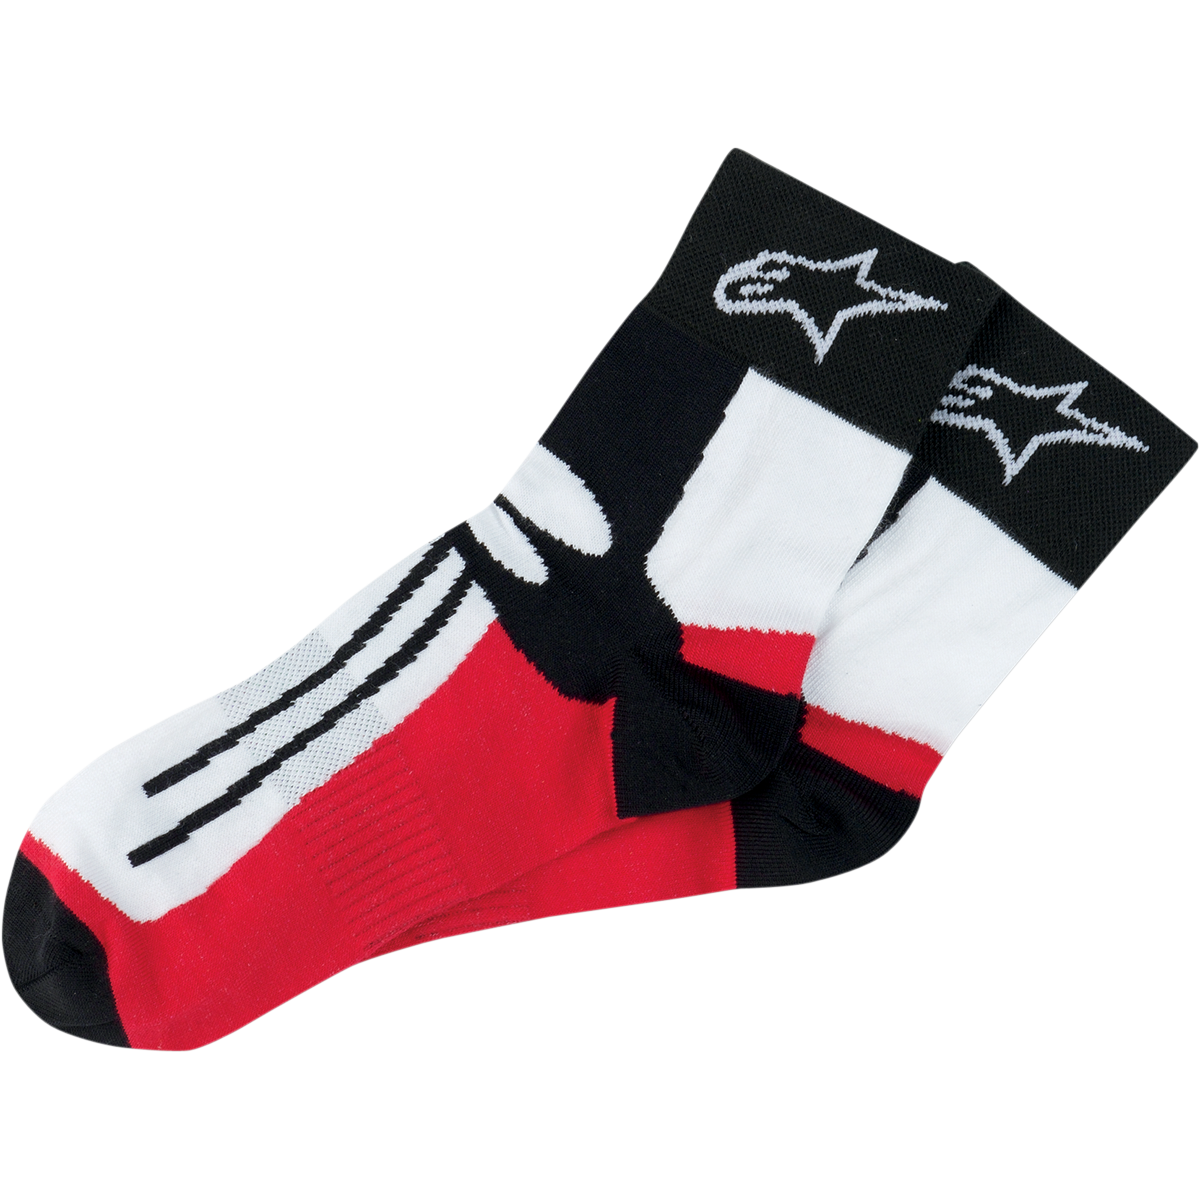 Road Racing Socks — Over-Ankle